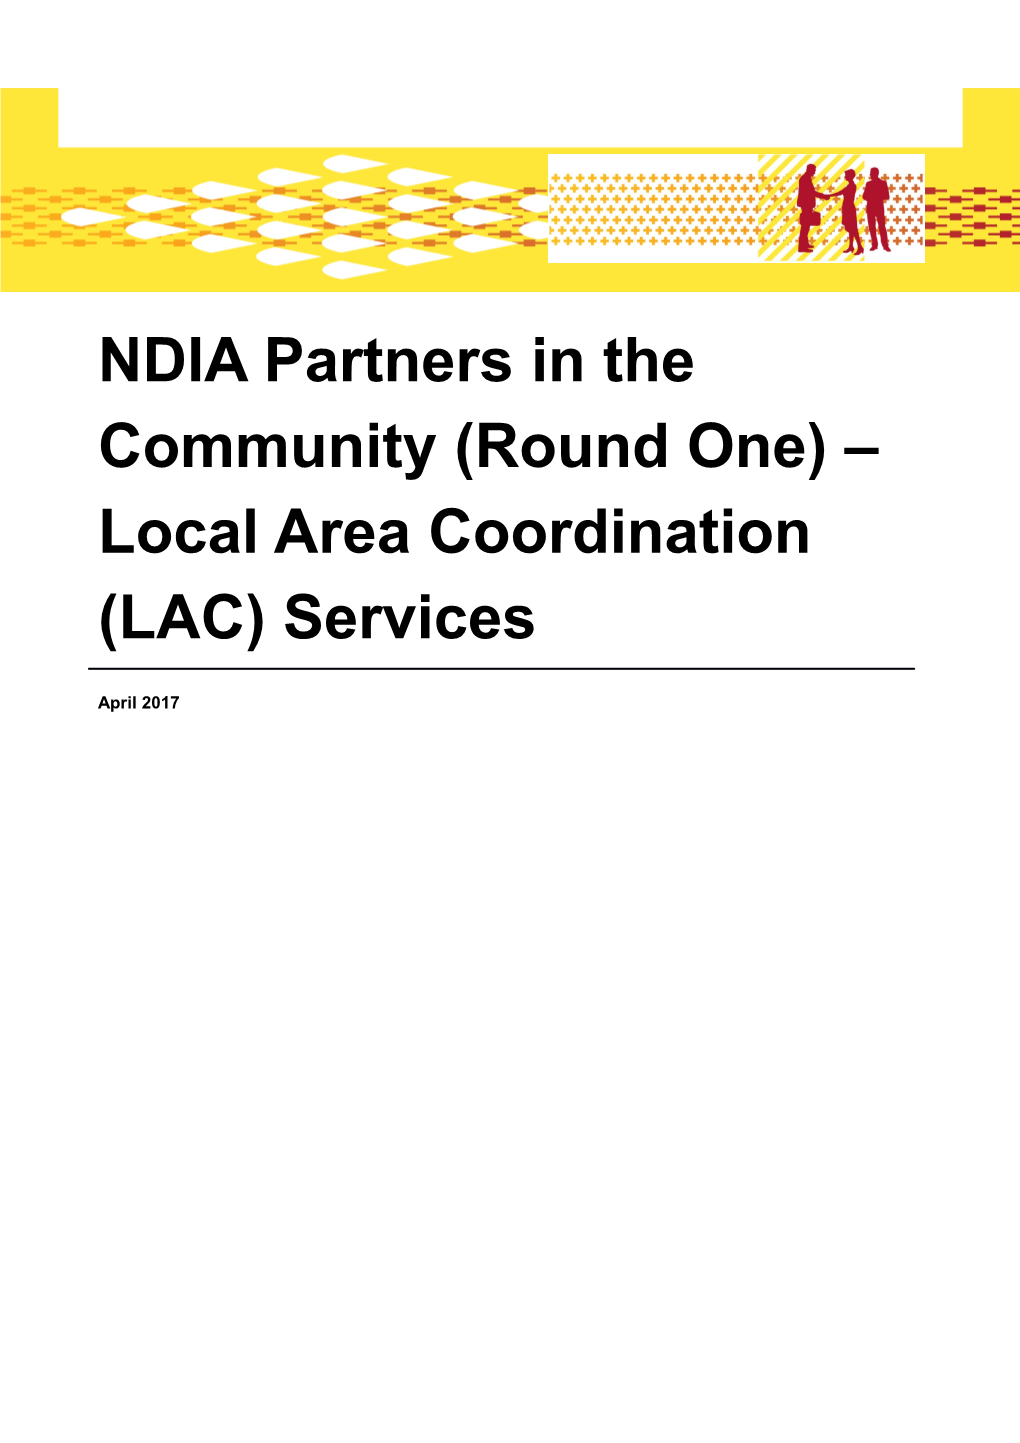 NDIA Partners in the Community (Round One) Local Area Coordination (LAC) Services